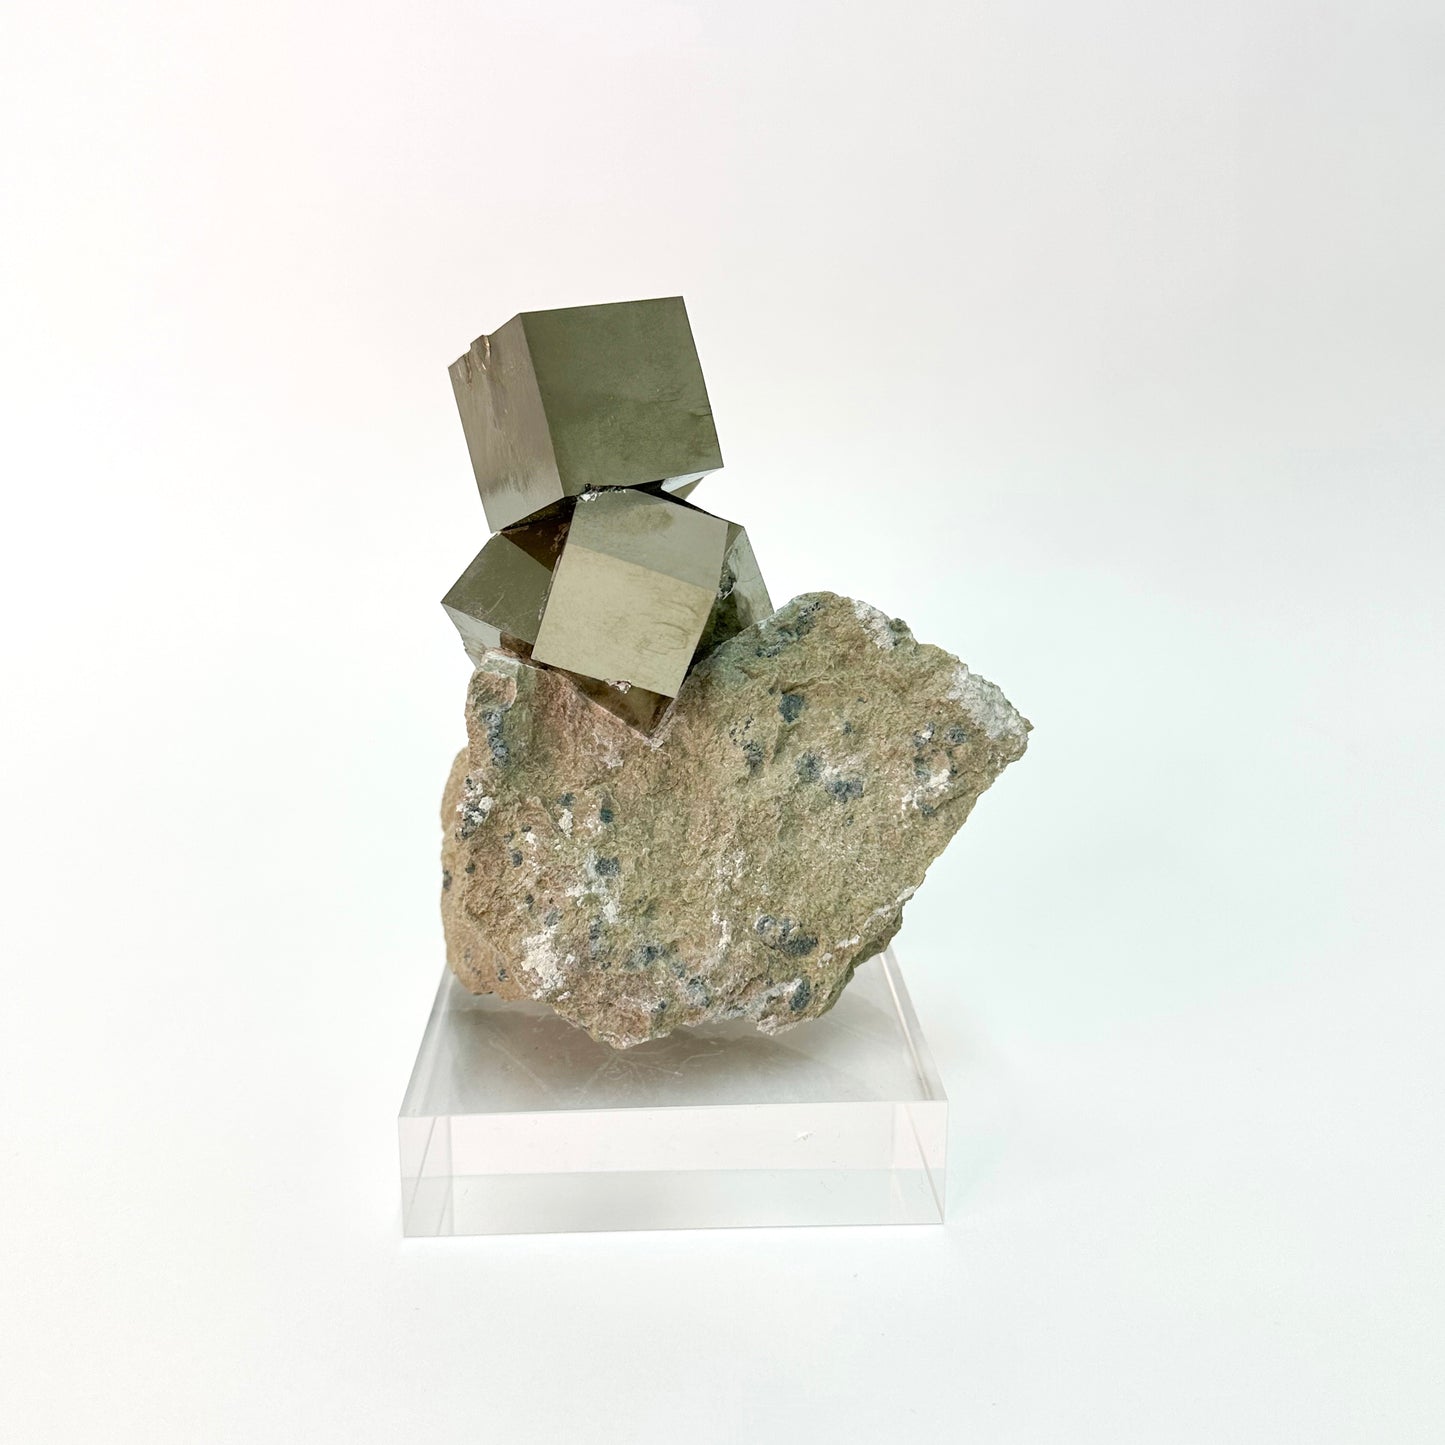 Cluster Pyrite on Matrix, 4 cube’s formation from Navajún, Spain